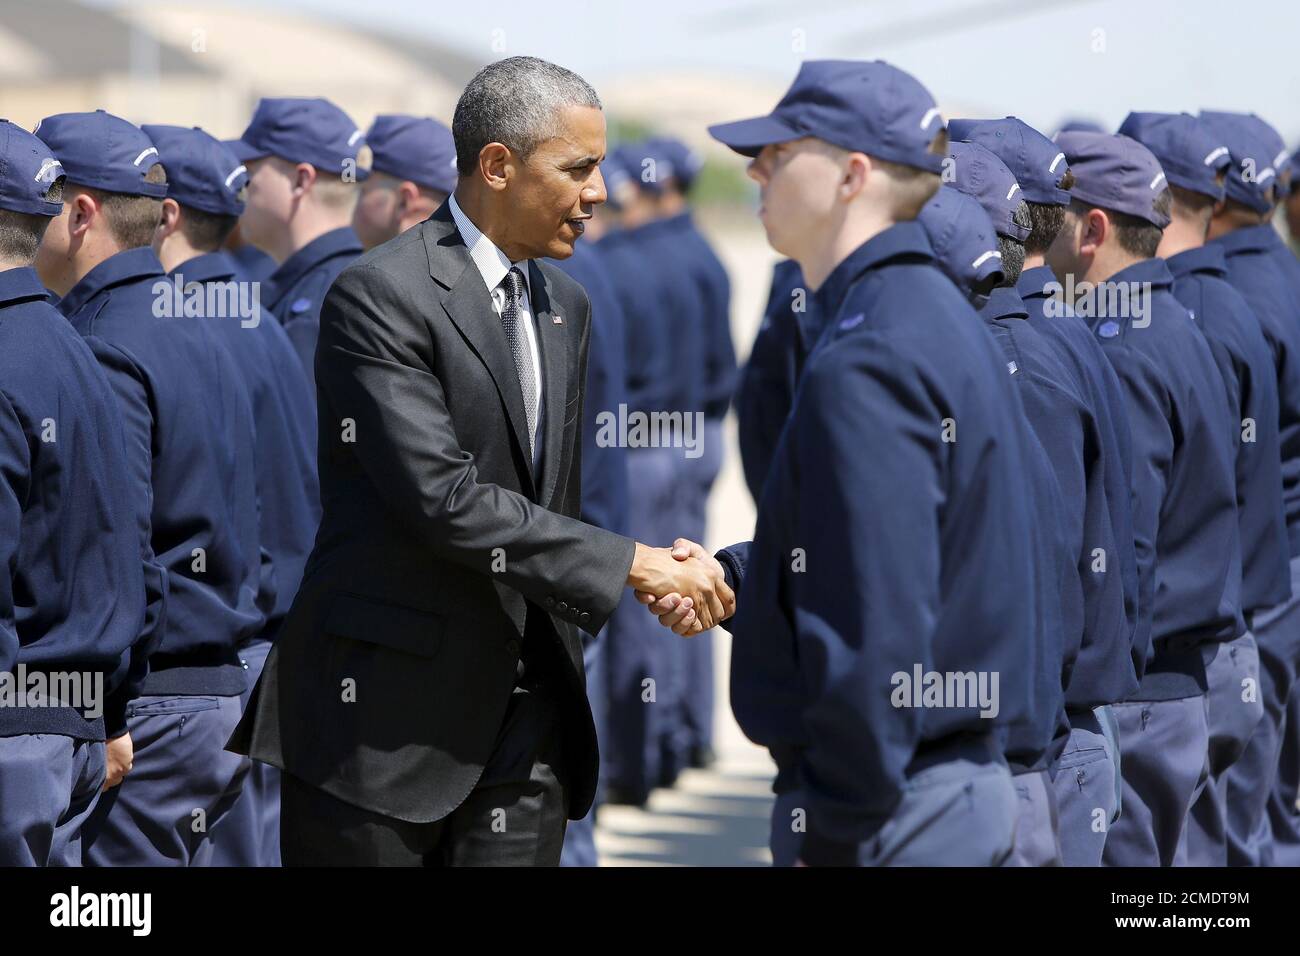 Air Force One Crew Members High Resolution Stock Photography and Images -  Alamy